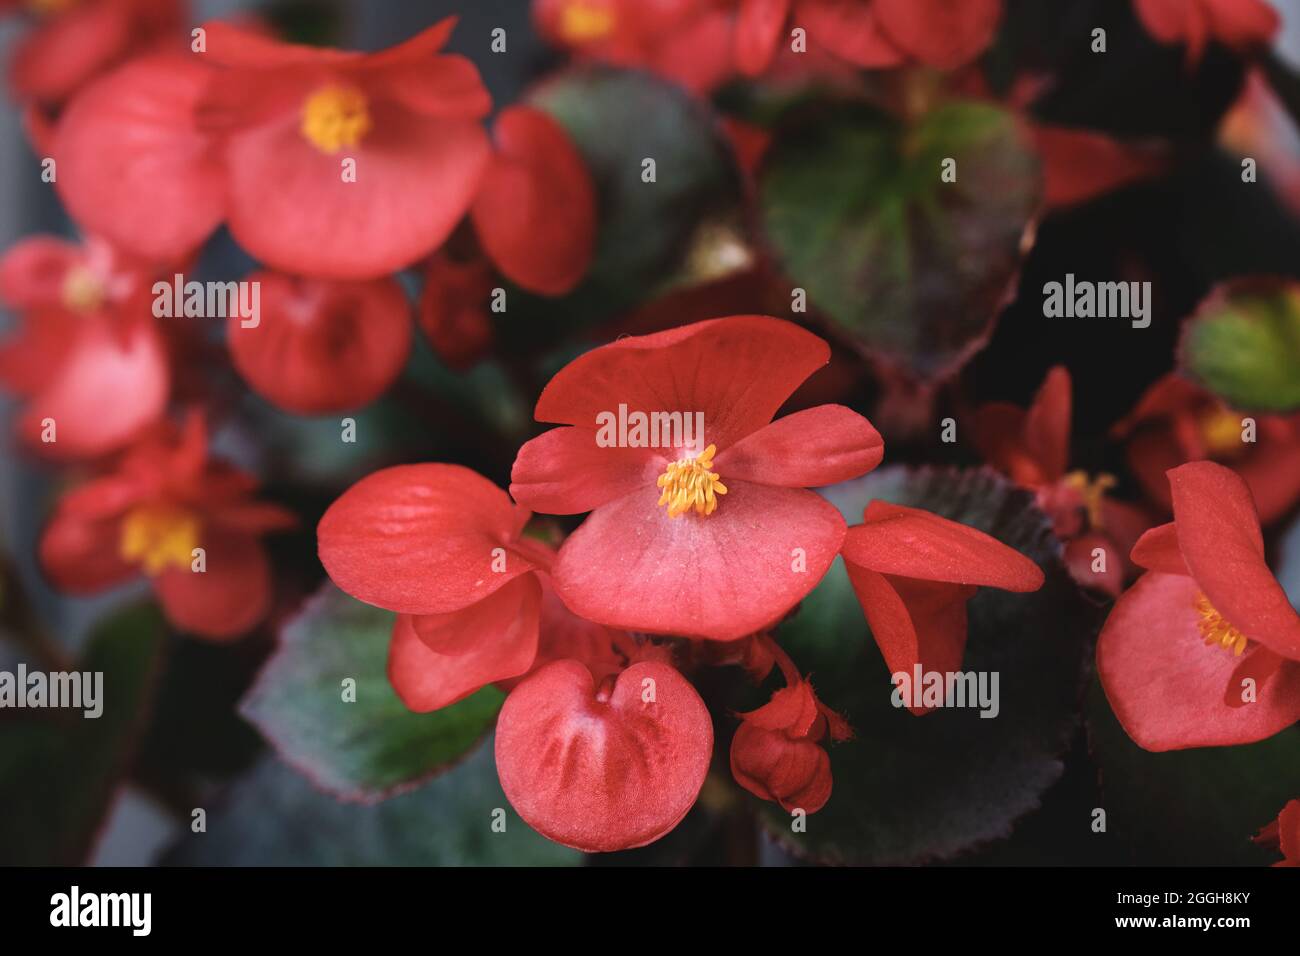 Begonia cucullata known as wax begonia rose blooming flowers Stock Photo